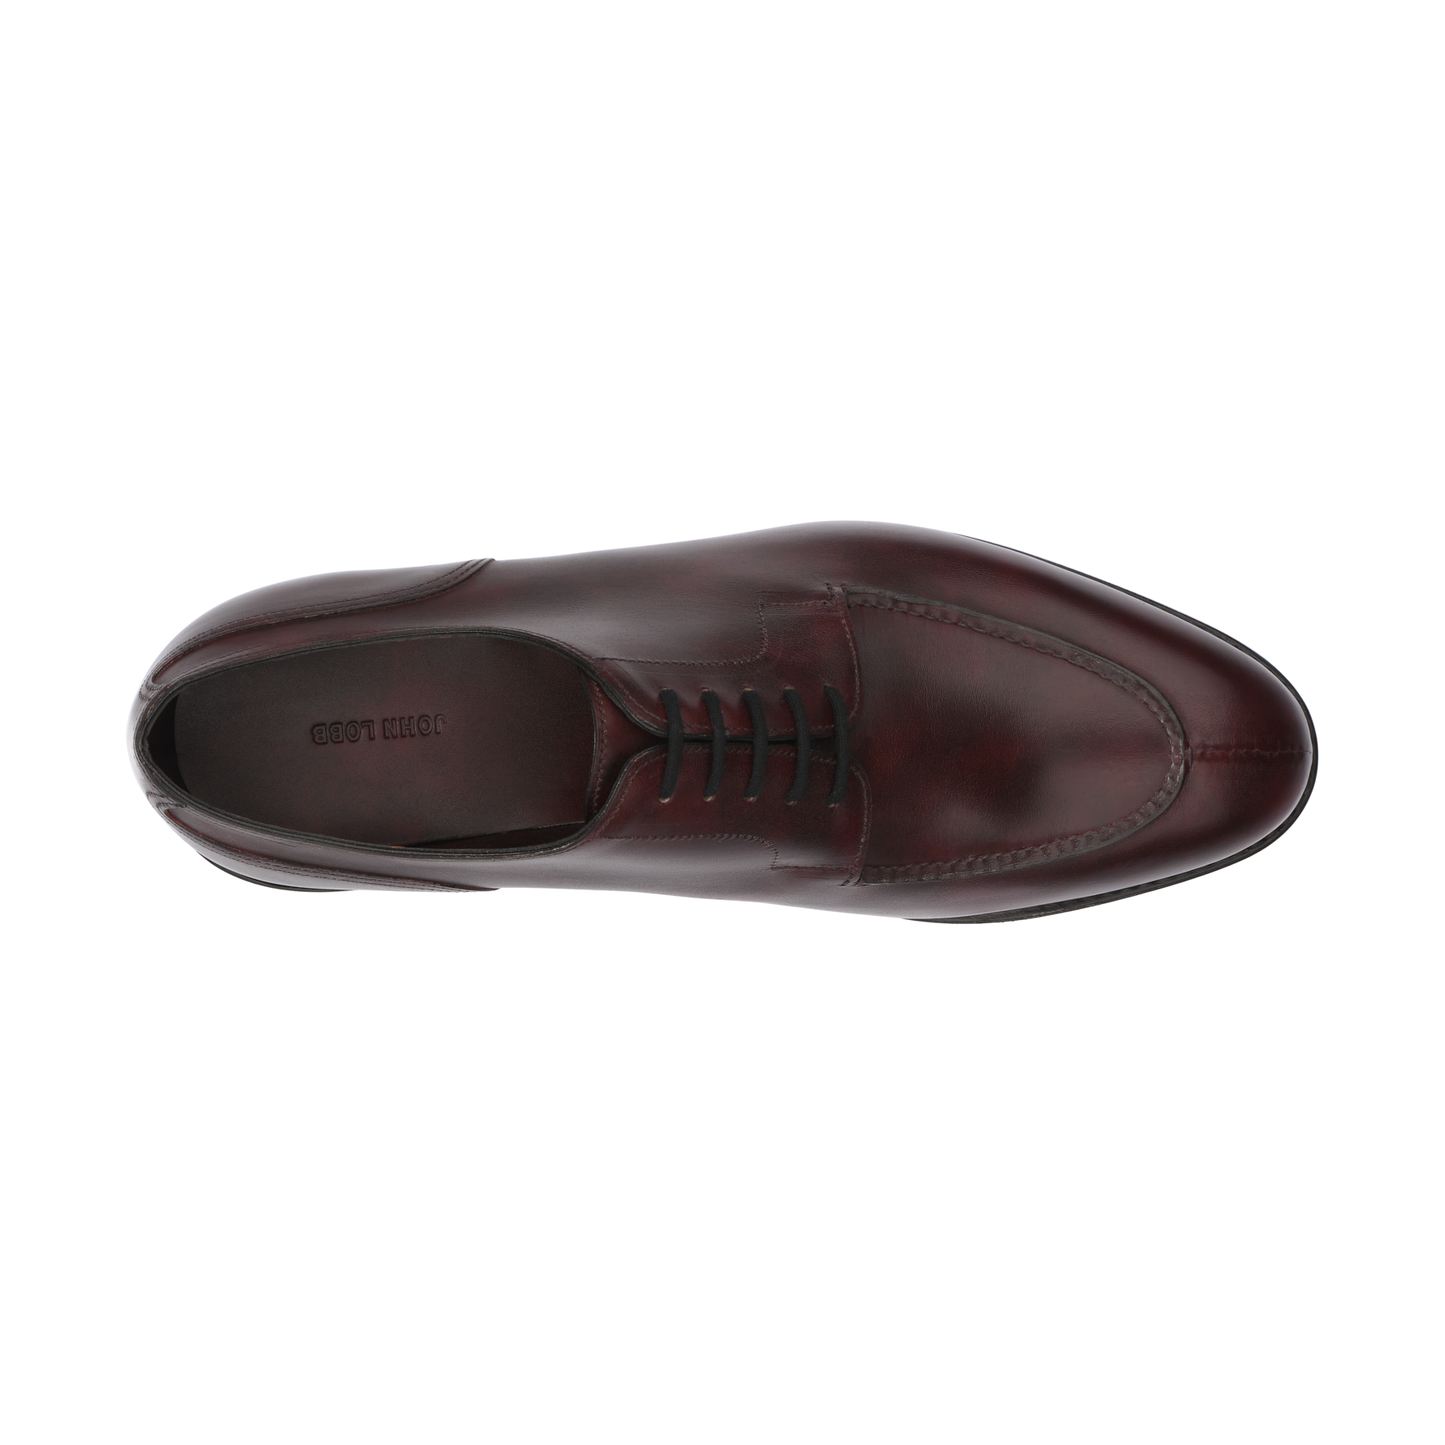 John Lobb "Harlyn" Five-Eyelet Leather Derby Shoes with Hand-Stitched Apron in Plum Red - SARTALE